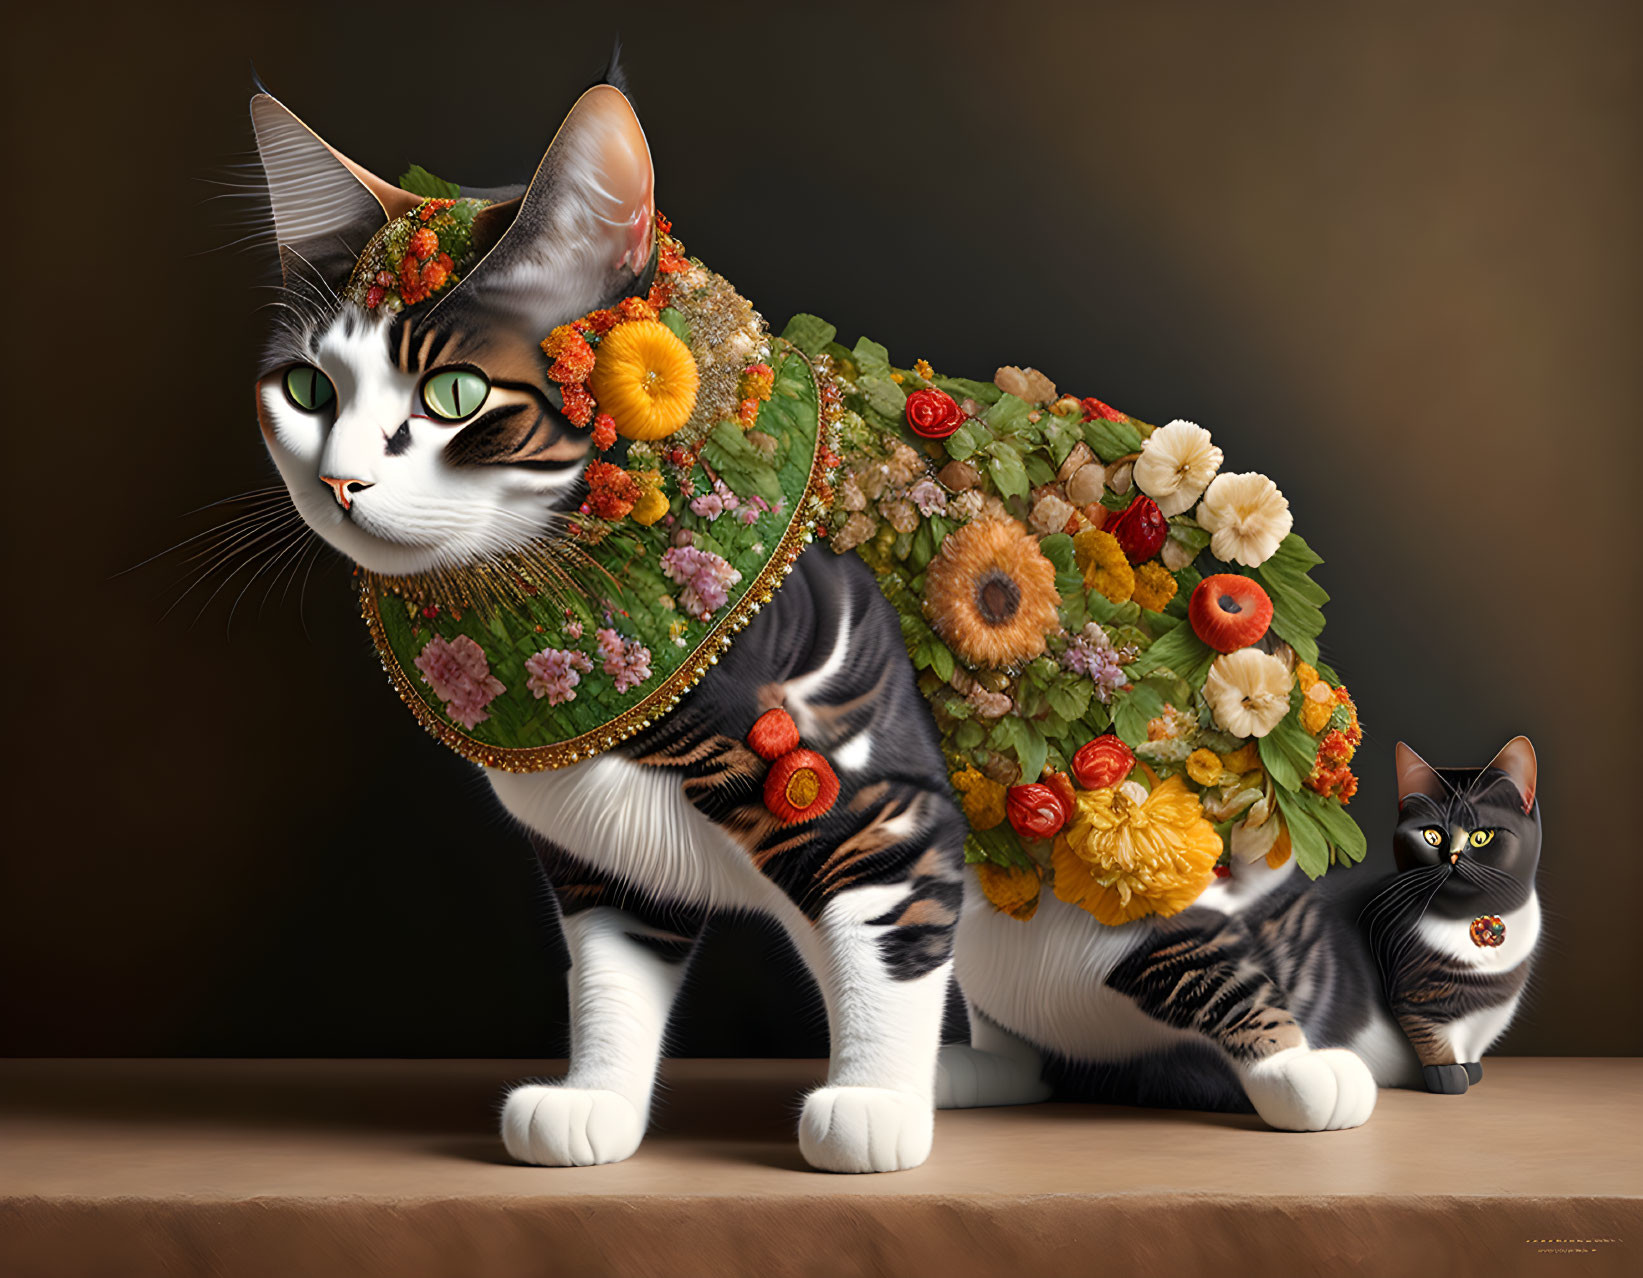 Digital Artwork: Two Cats with Floral Accessories